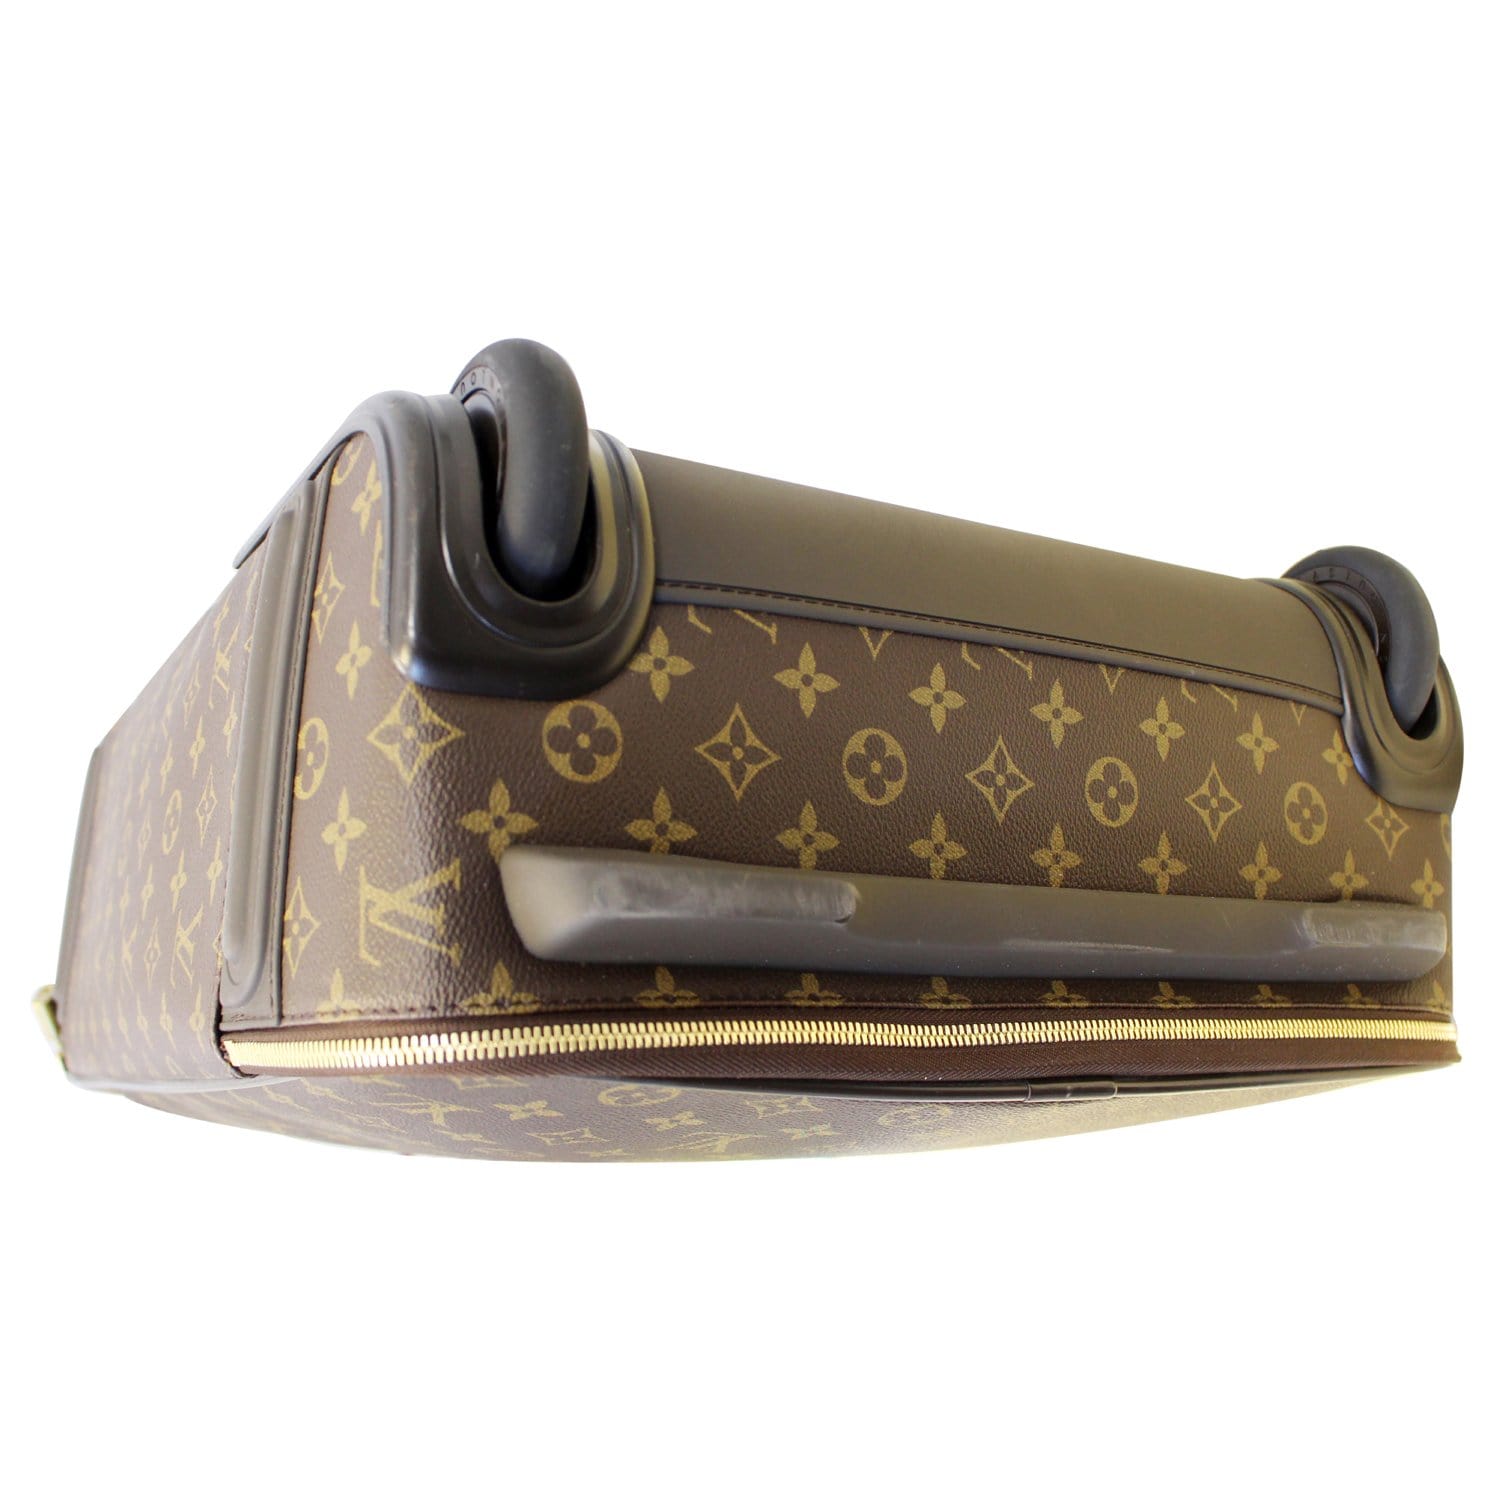 Louis Vuitton Pegase 55 Business - For Sale on 1stDibs